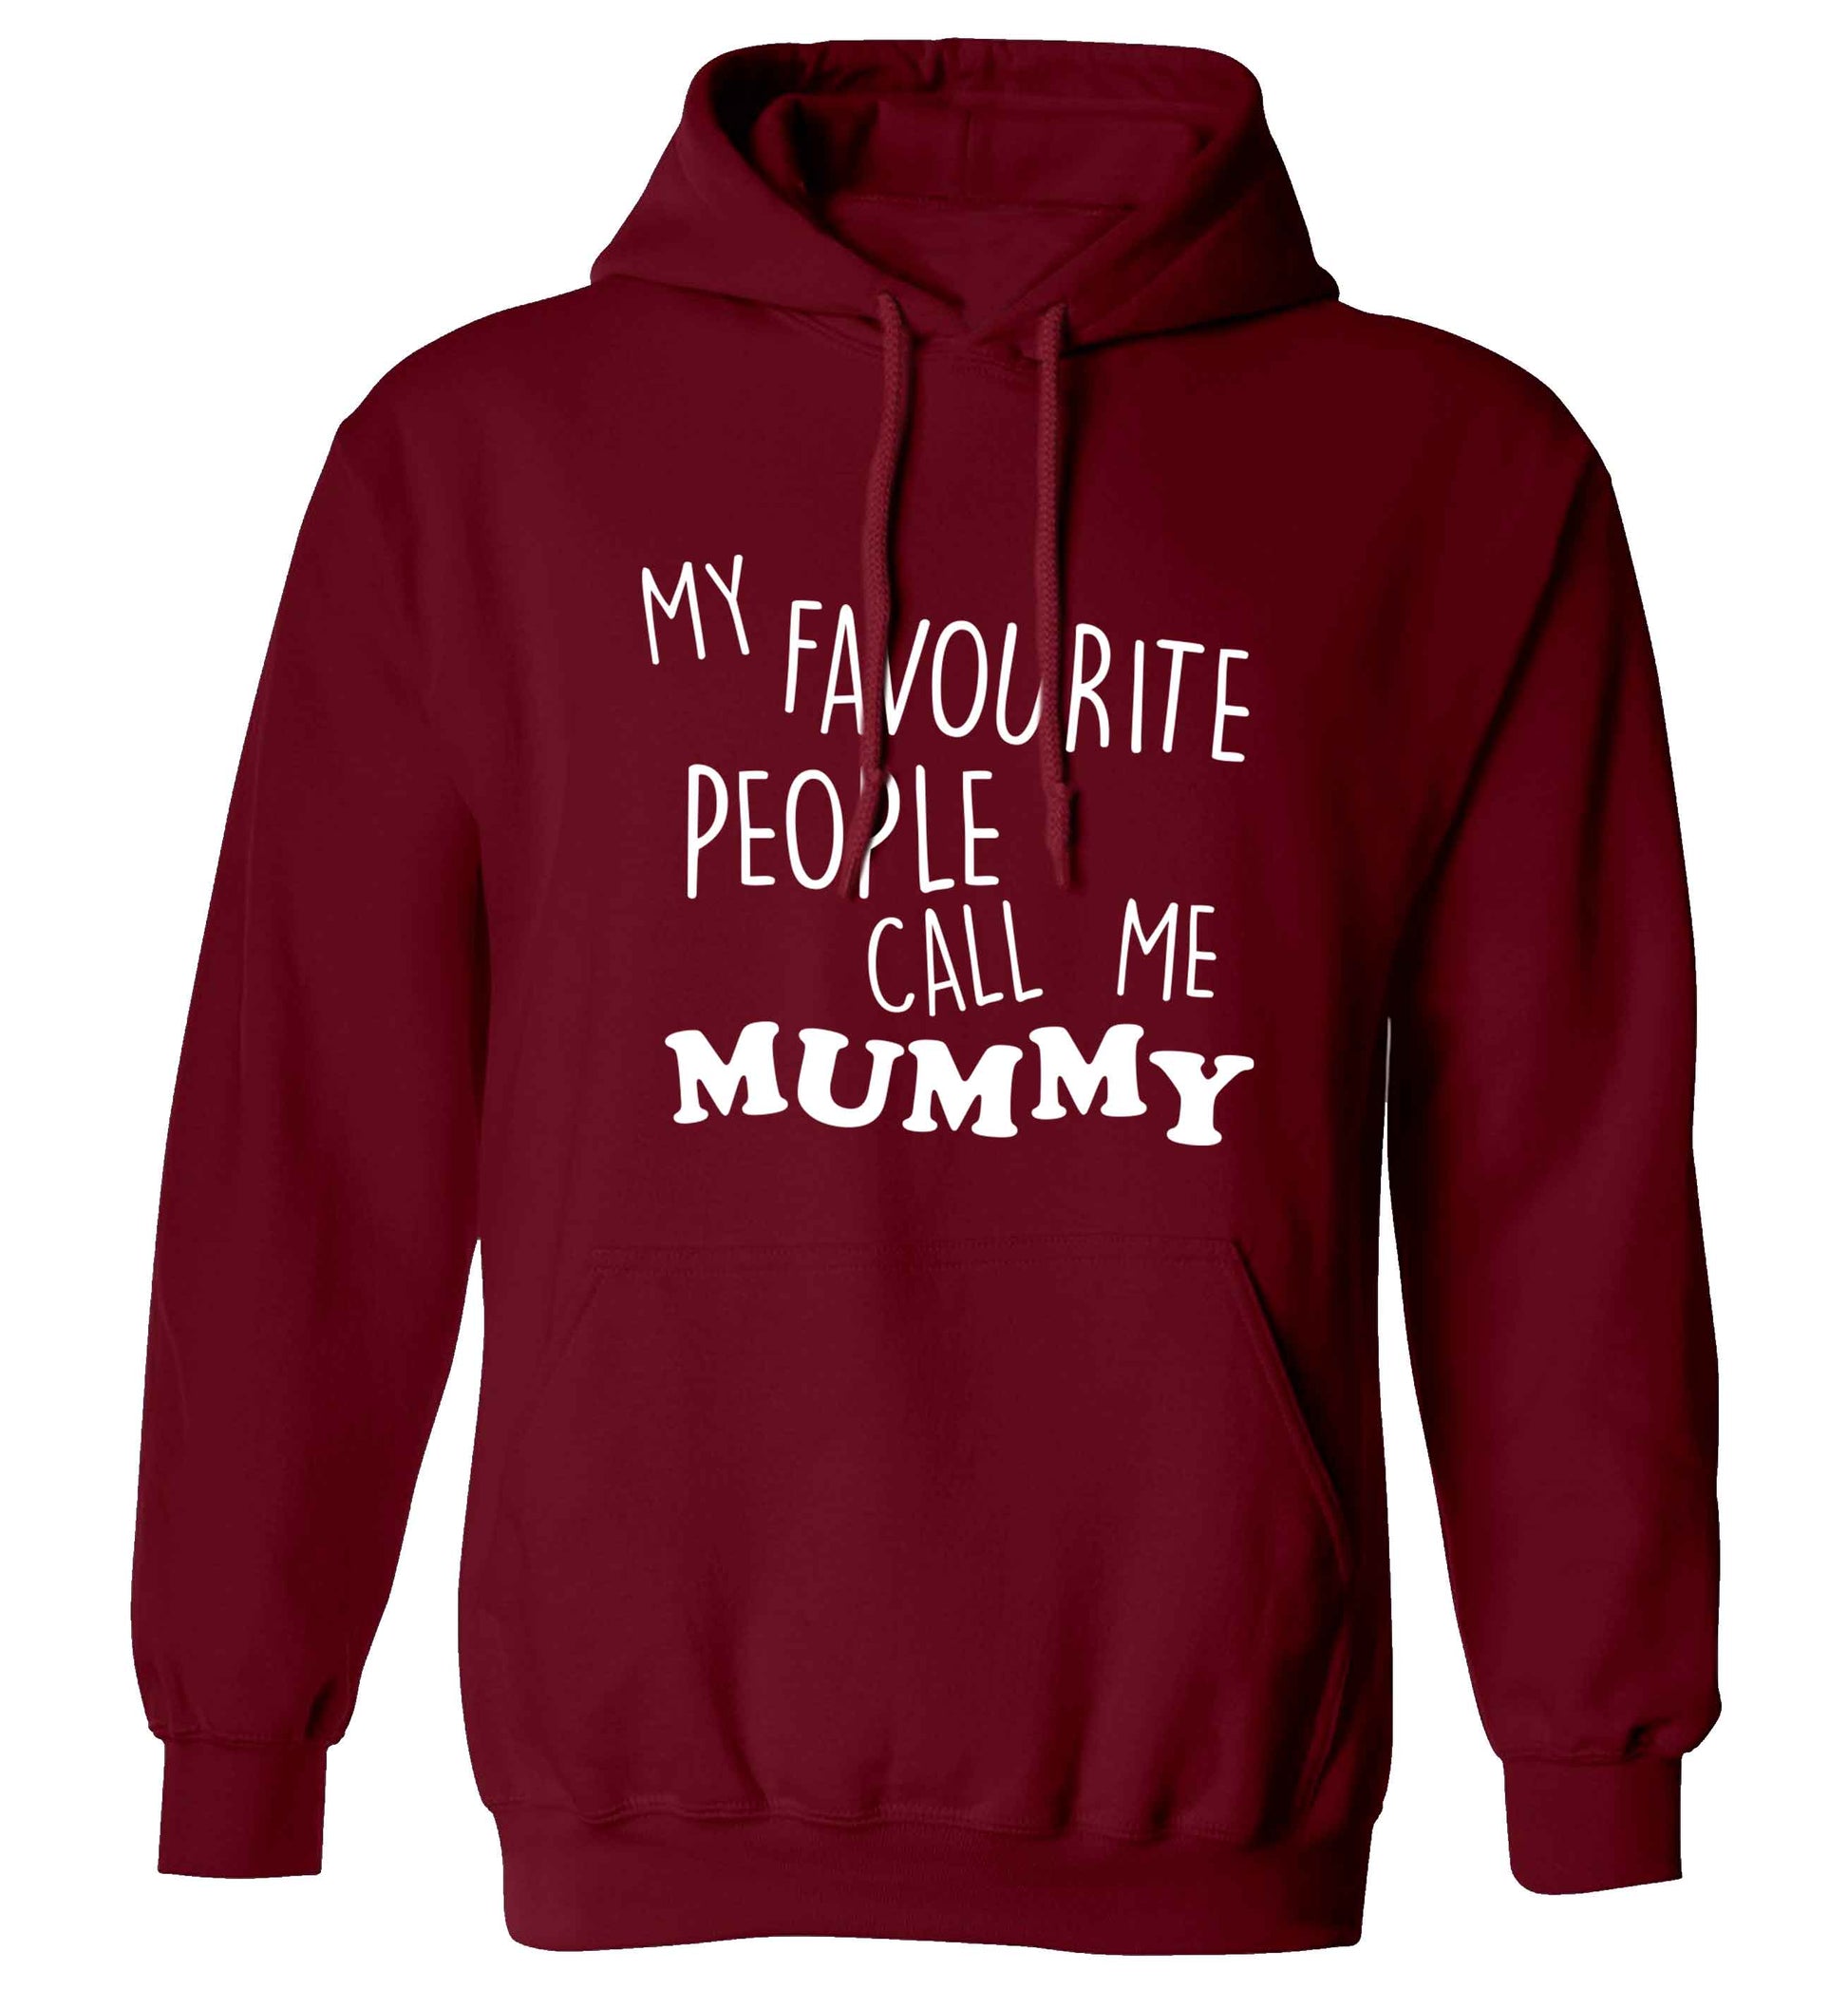 My favourite people call me mummy adults unisex maroon hoodie 2XL